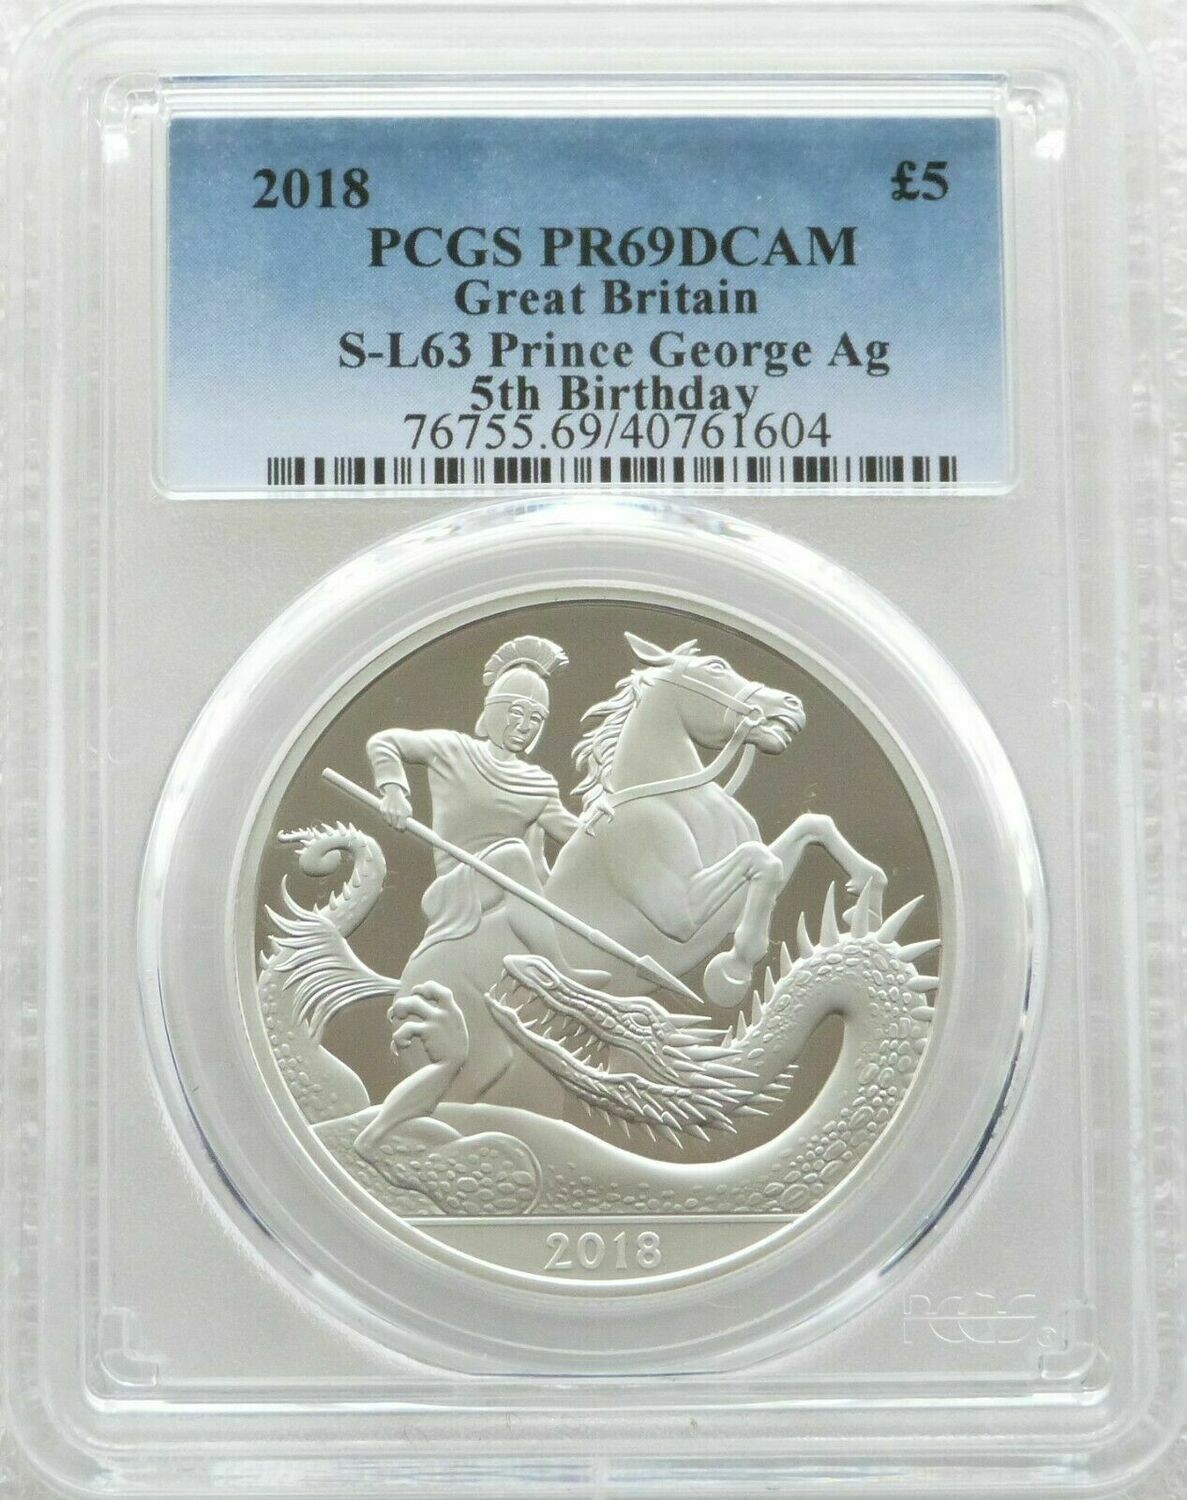 2018 Prince George 5th Birthday £5 Silver Proof Coin PCGS PR69 DCAM